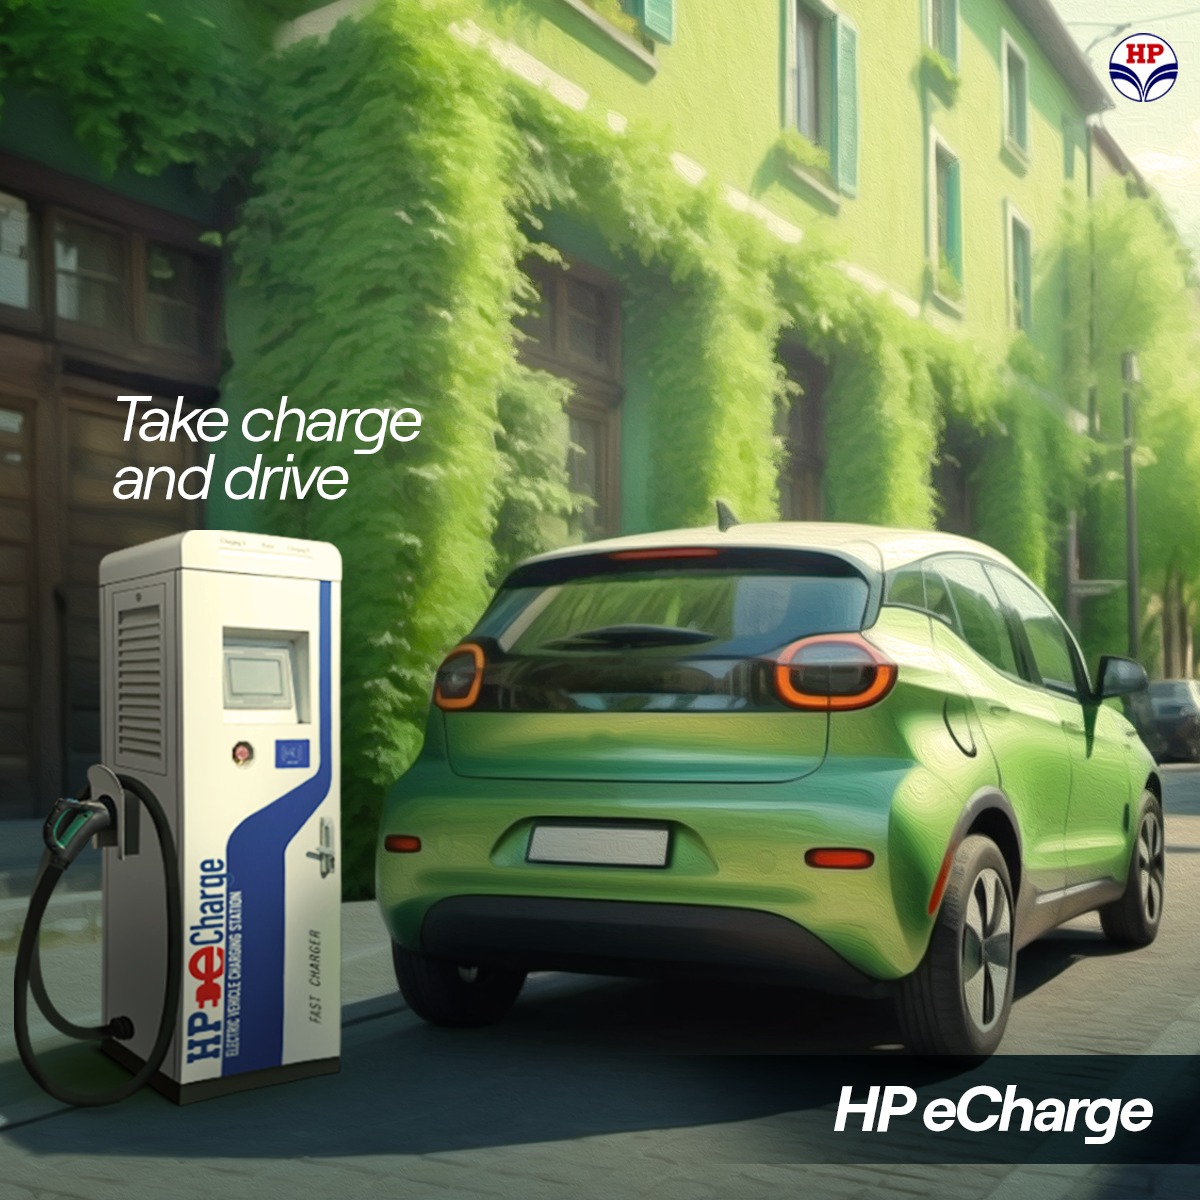 Discover the HP eCharge App for seamless EV charging. Locate, reserve, and pay at HPCL stations effortlessly. Track your charging history, set reminders, and receive notifications when fully charged. Your ultimate EV companion. #HPRetail #MeraHPPump #HPCL #evchargingstation